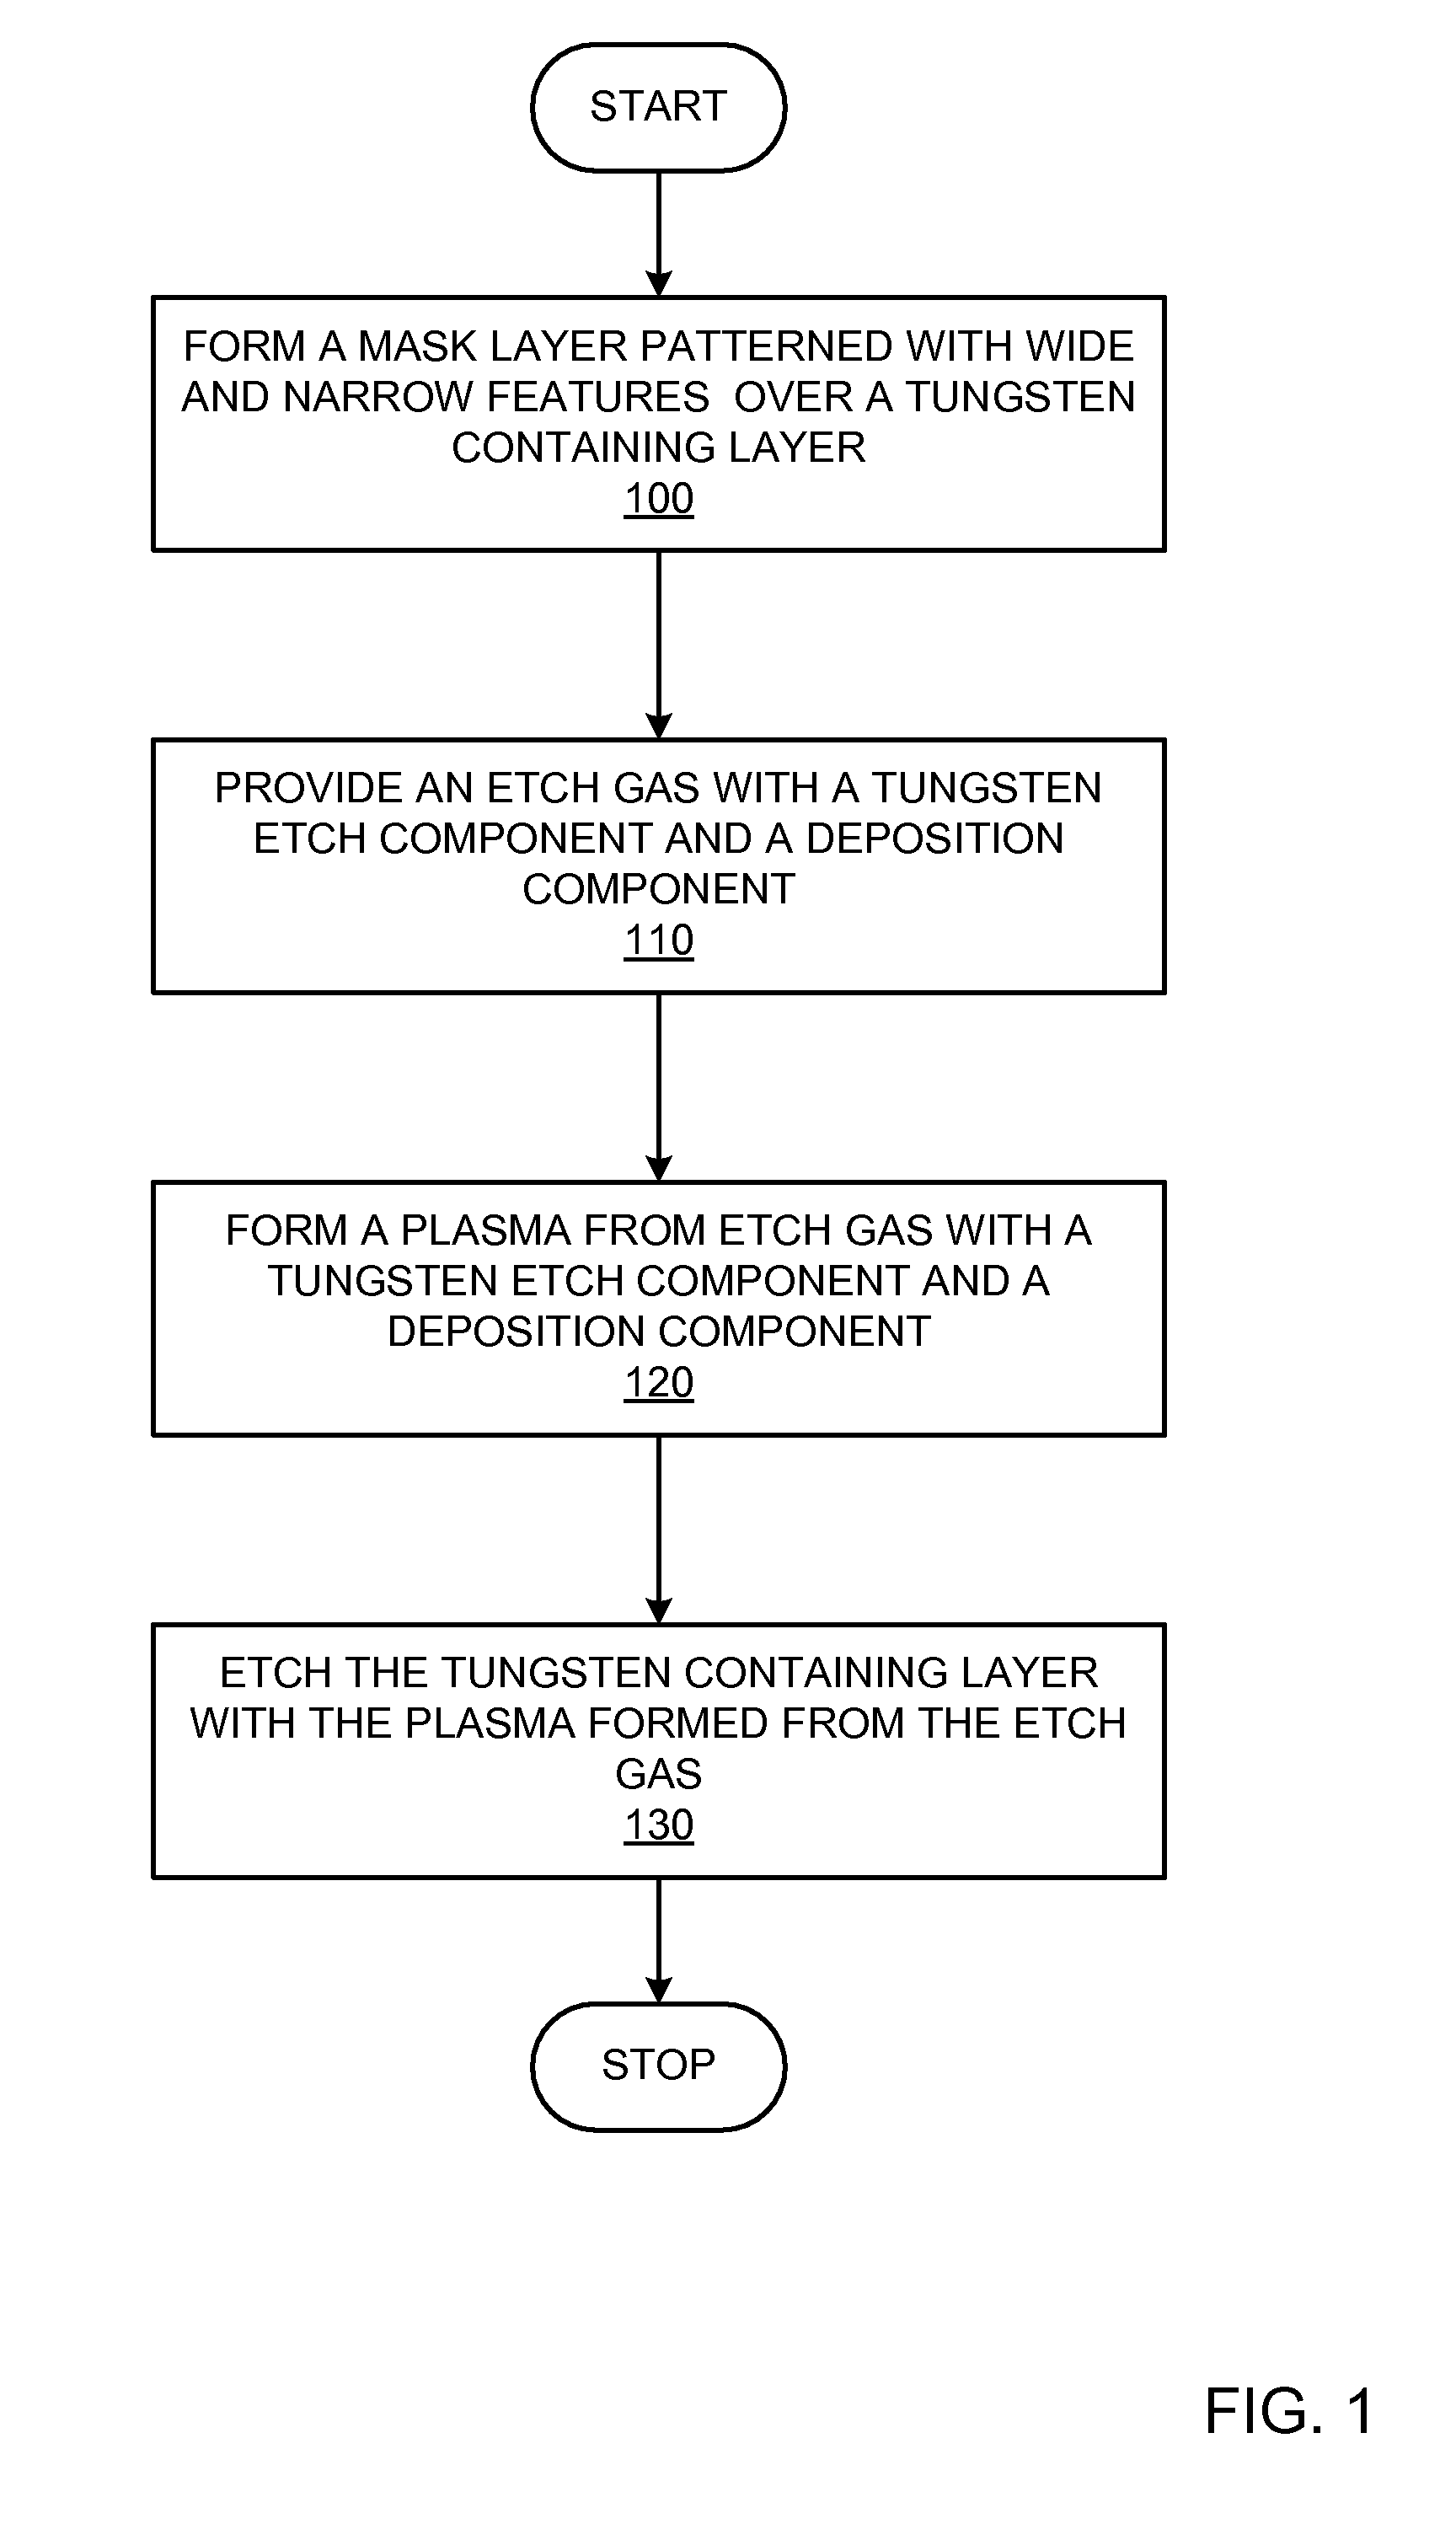 Method of controlling etch microloading for a tungsten-containing layer